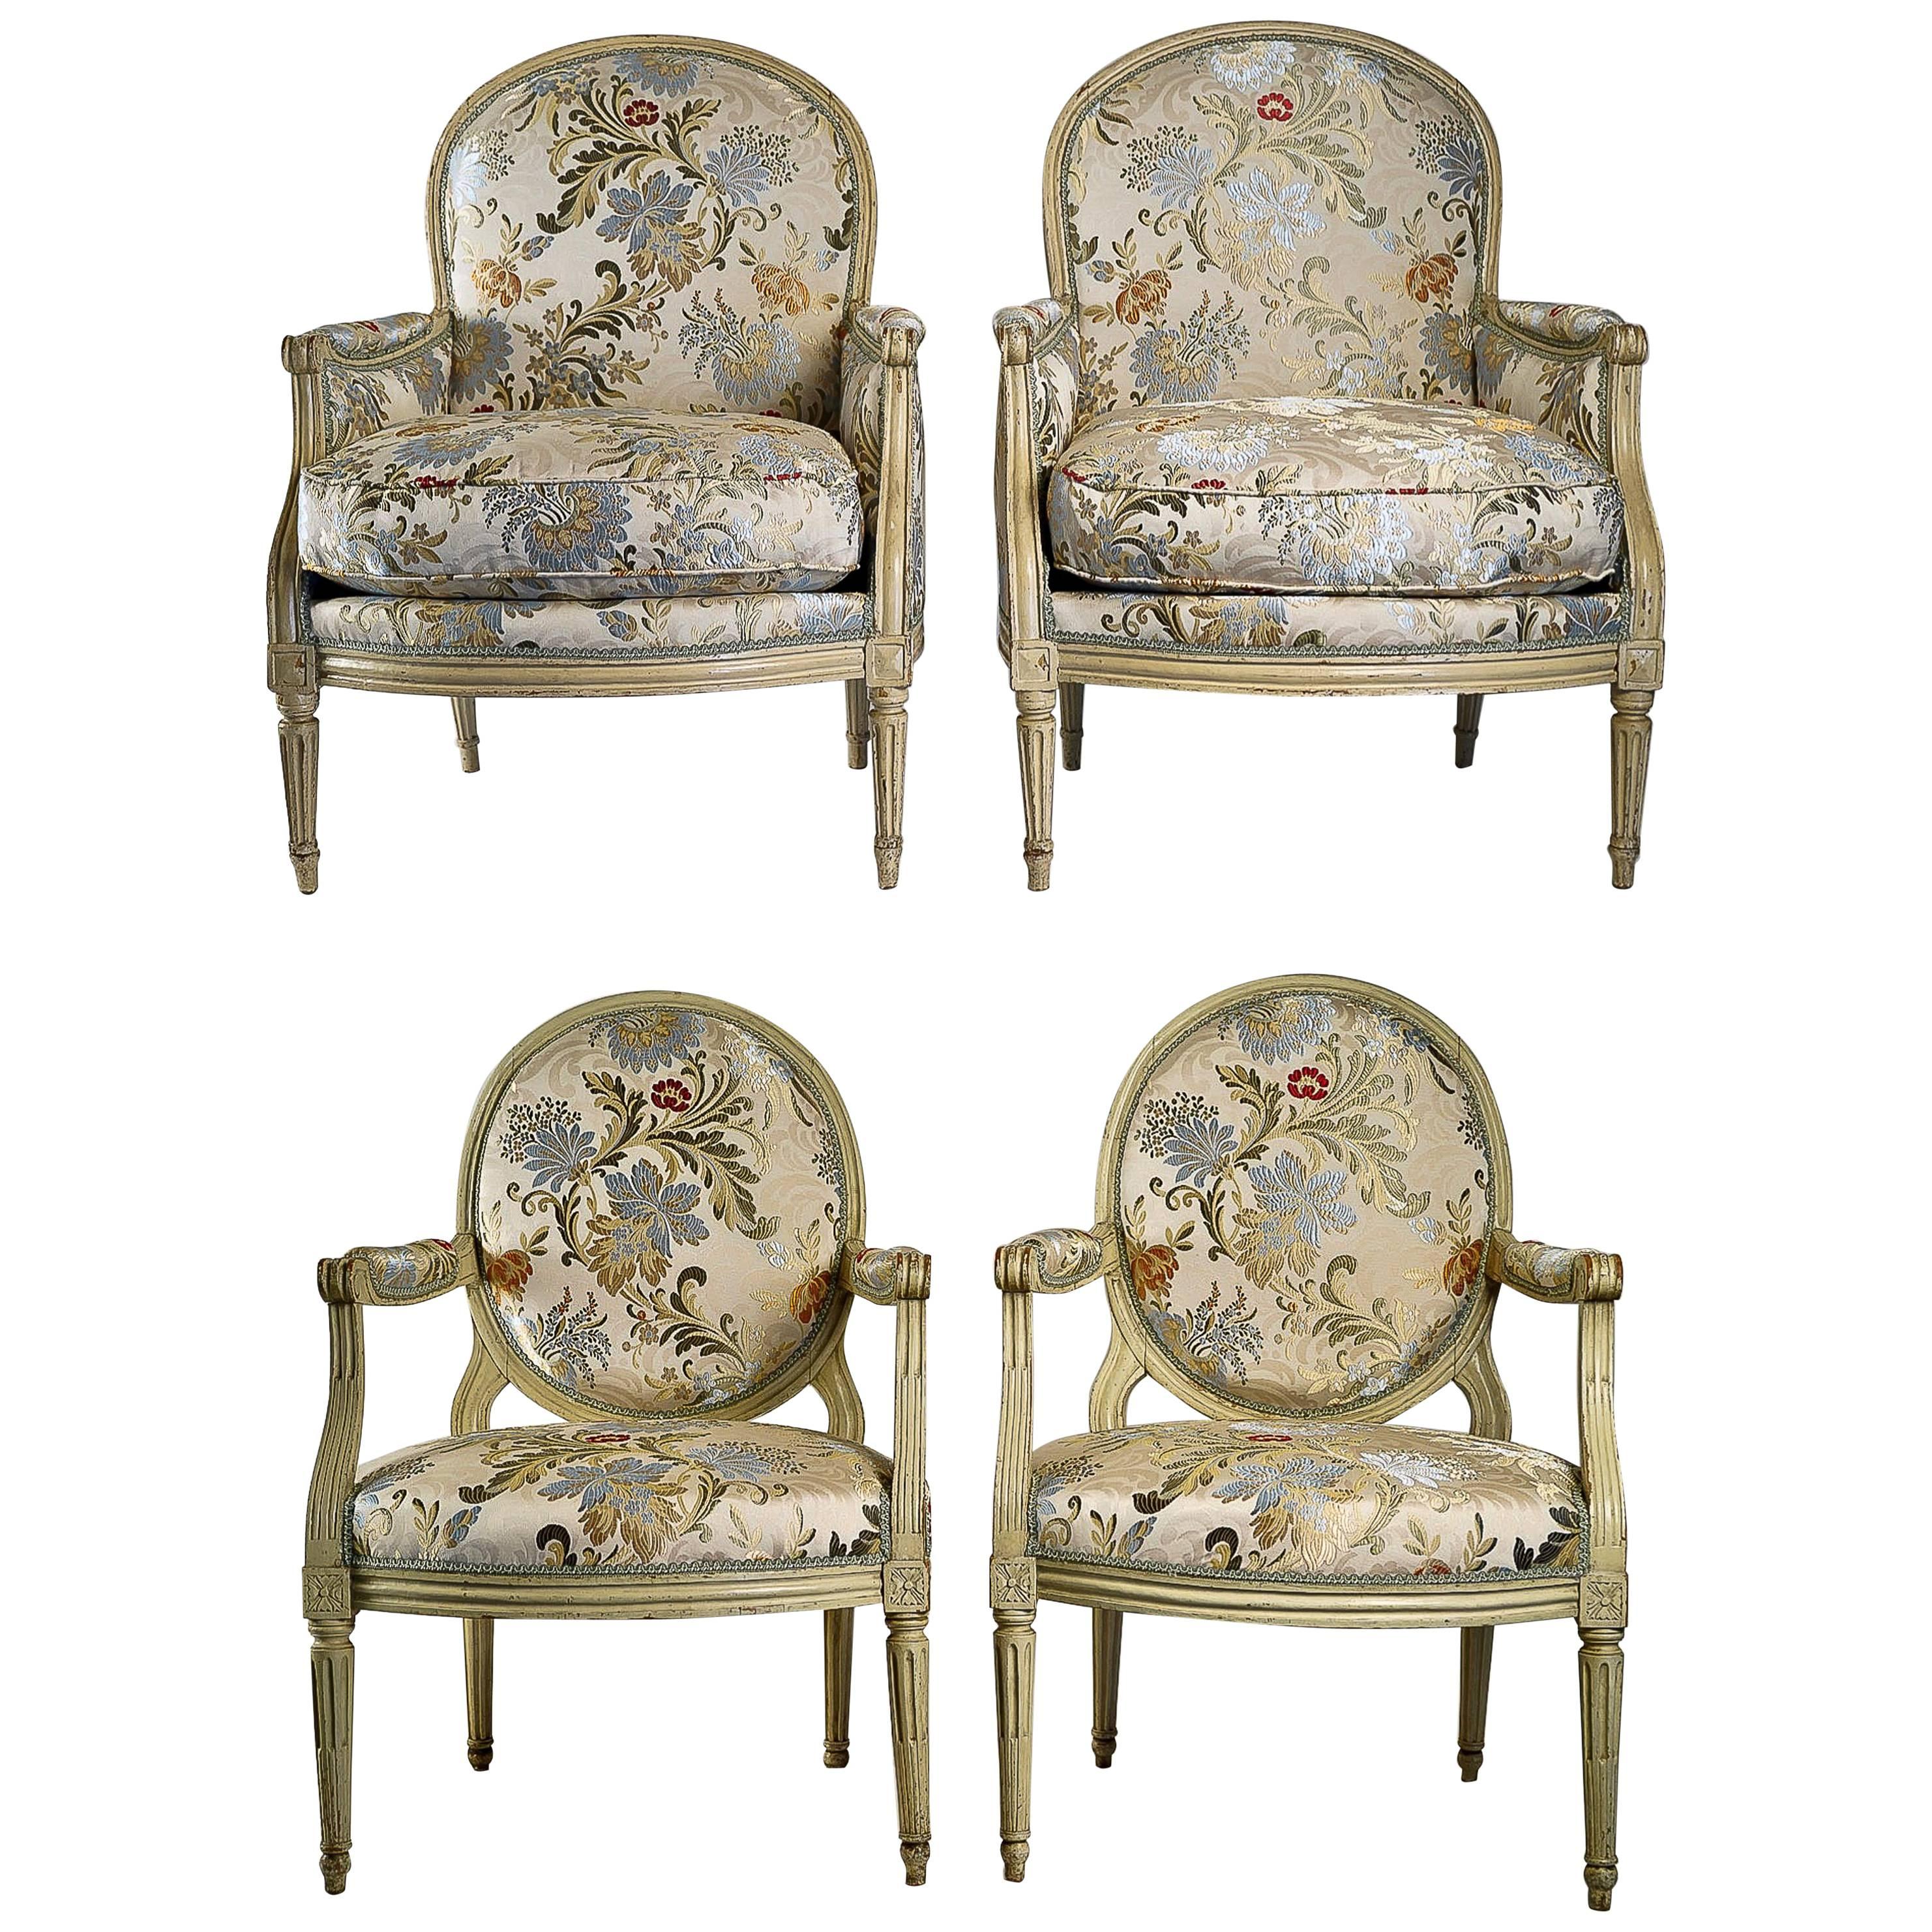 French 18th Century Lacquered Beechwood Four-Piece Salon Suite Louis XVI Period For Sale